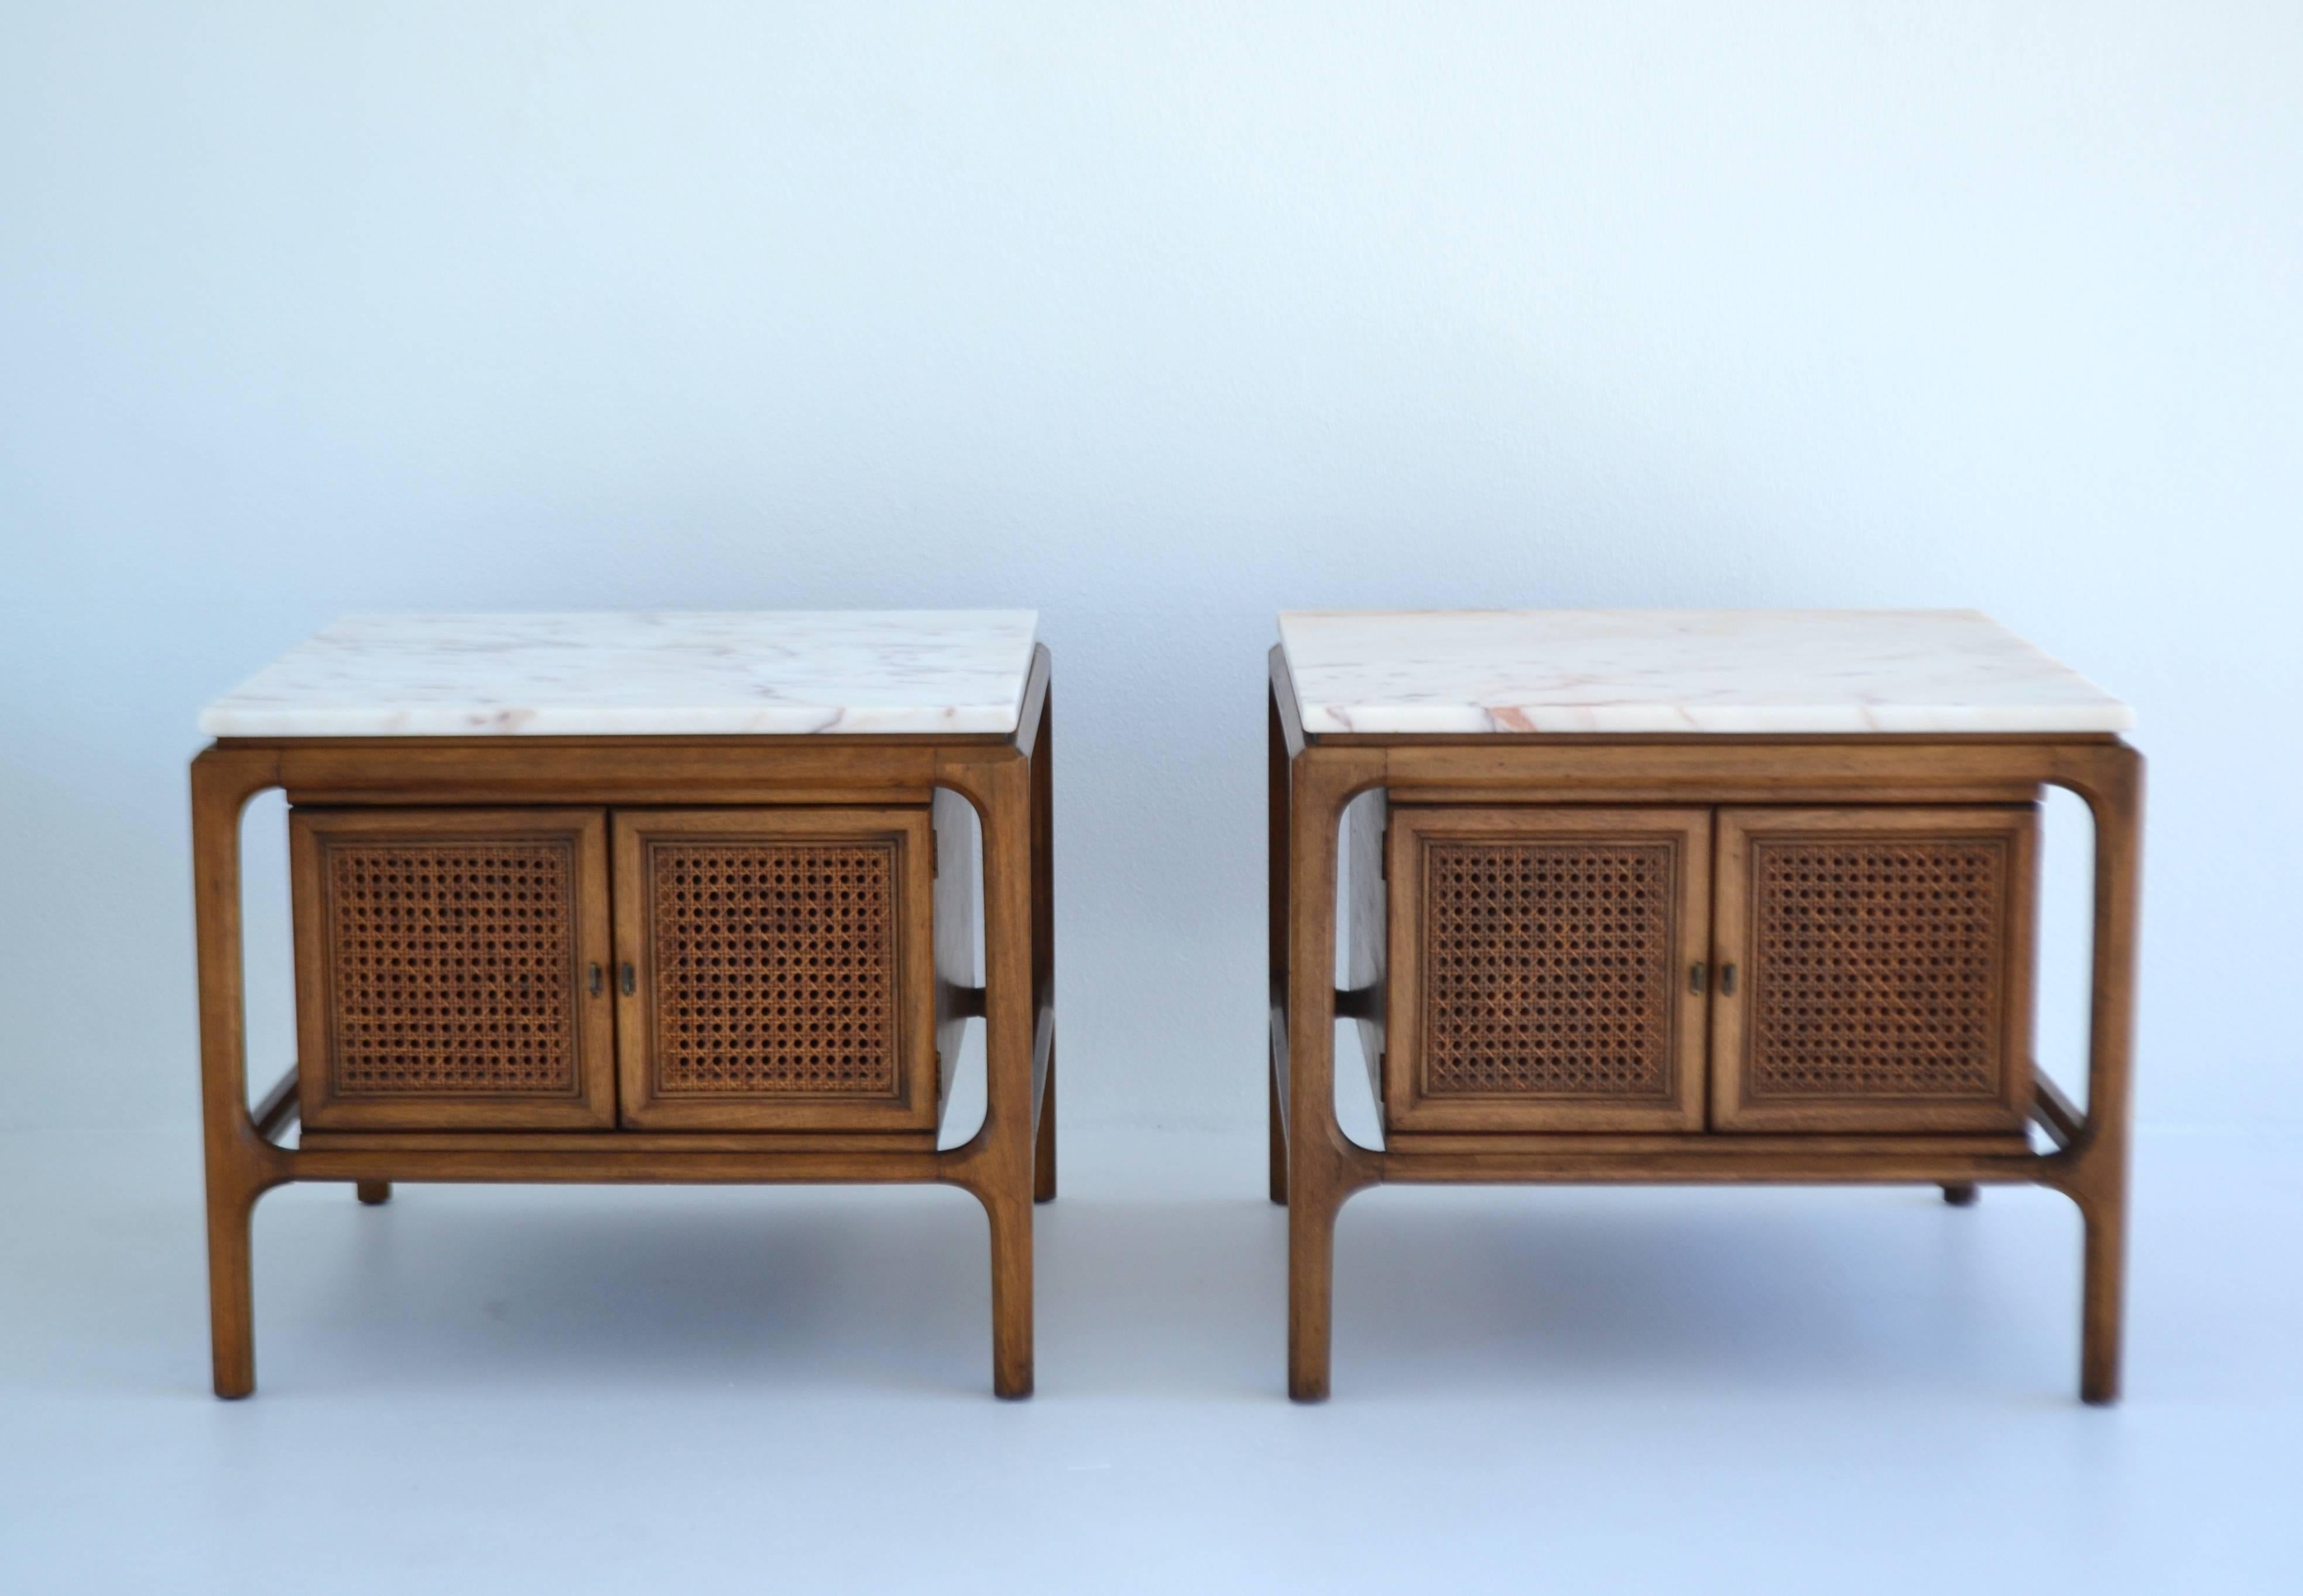 Striking pair of Midcentury sculptural walnut end tables or cabinets, circa 1950s-1960s. These beautiful handcrafted bedside tables or nightstands are artisan designed of carved walnut, caned door fronts, aged brass door pulls and honed white